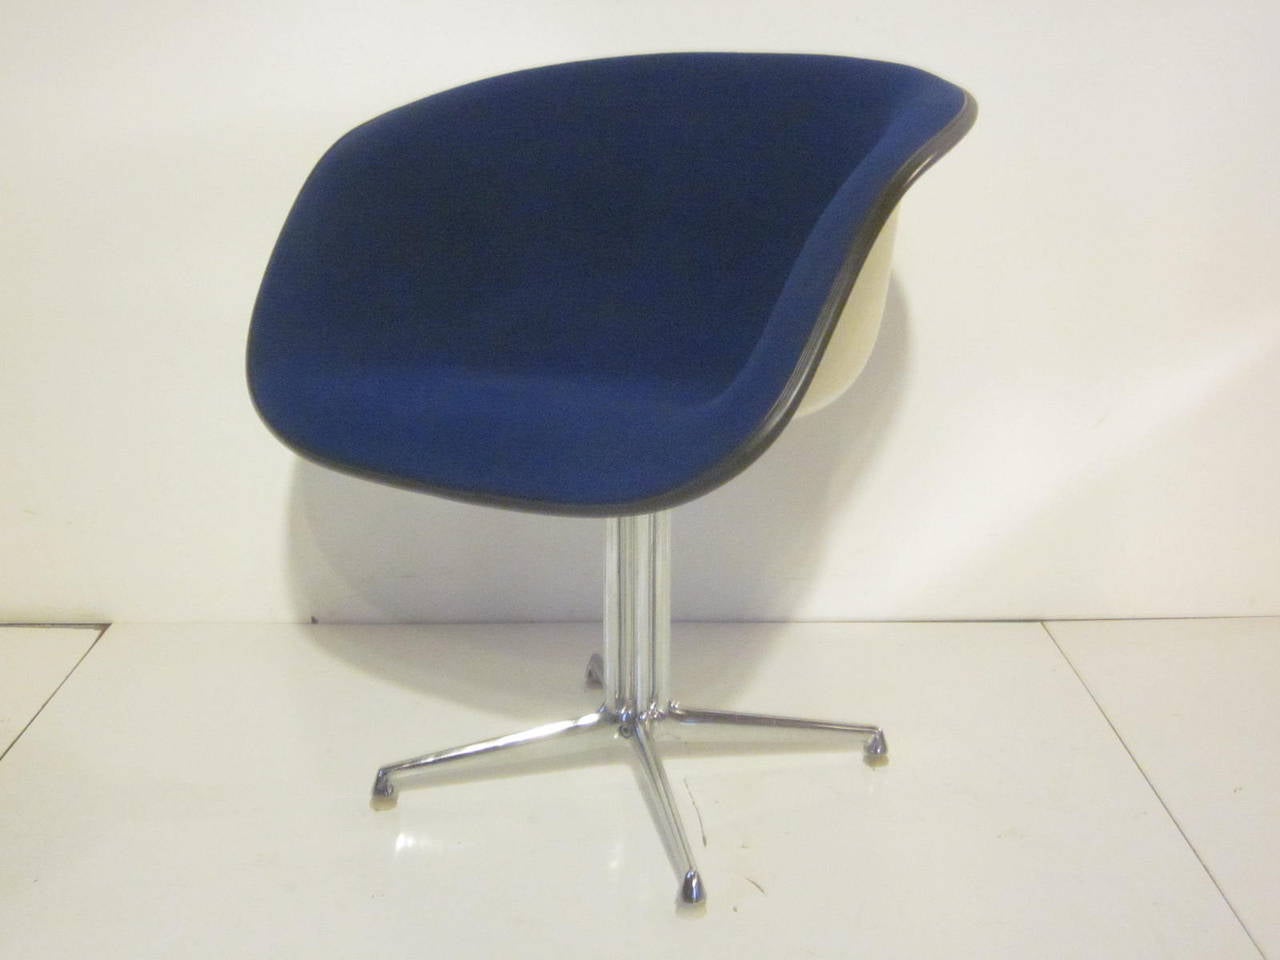 A blue upholstered Eames La Fonda chair with chromed base, off white fiberglass shell and bone toned plastic feet. Manufactured by the Herman Miller furniture company.